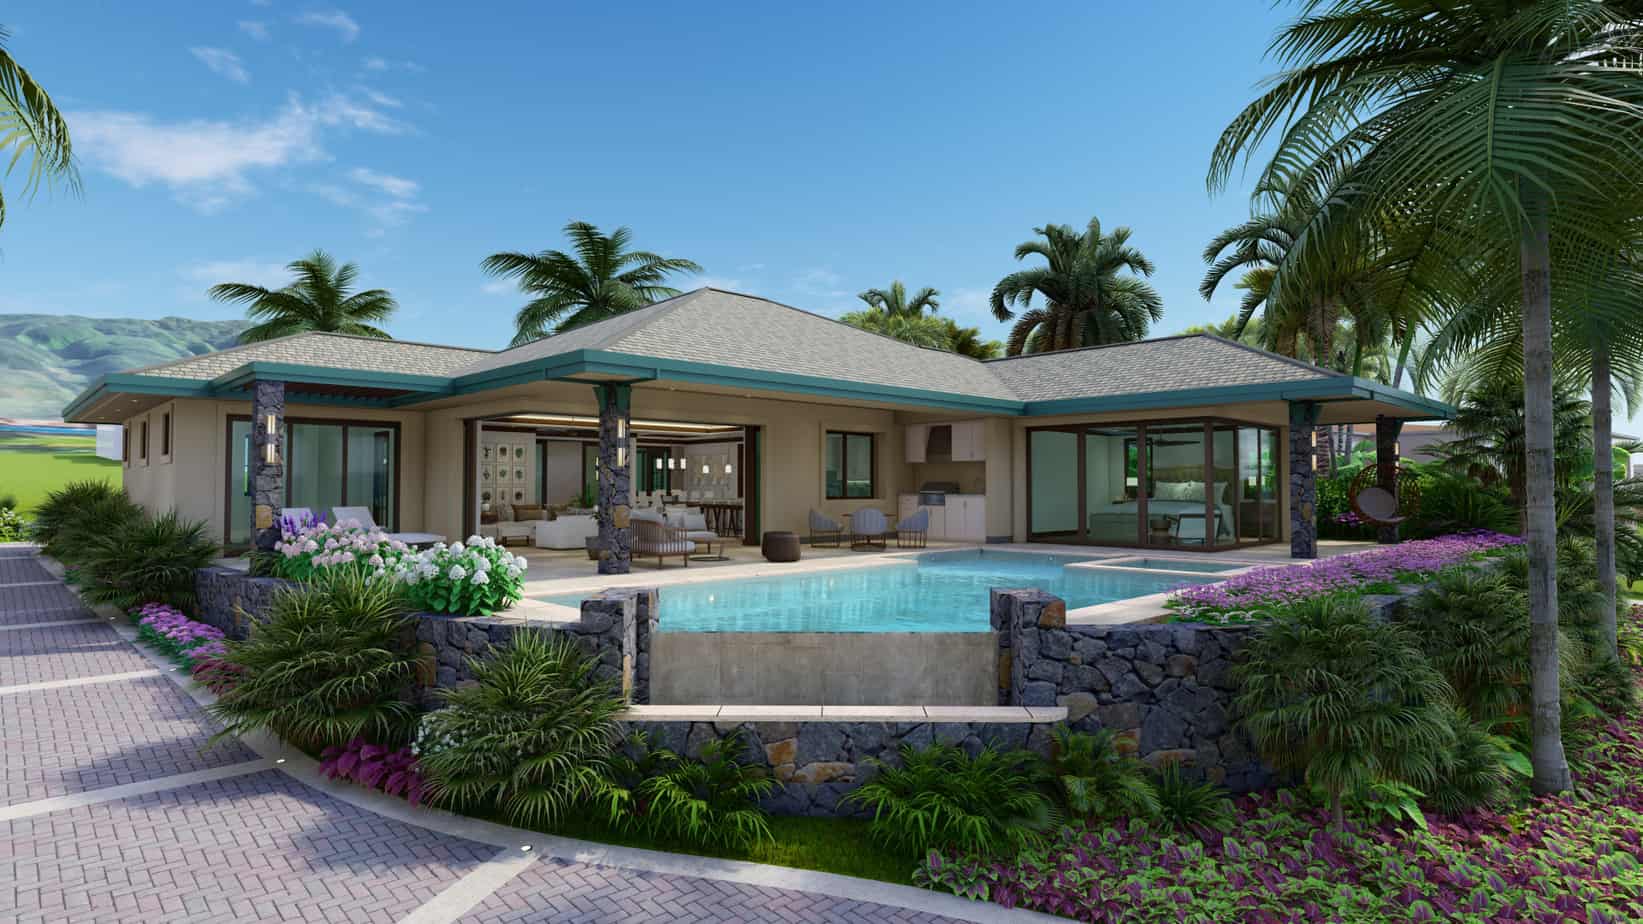 Build This Maui Home & Make It Your Own